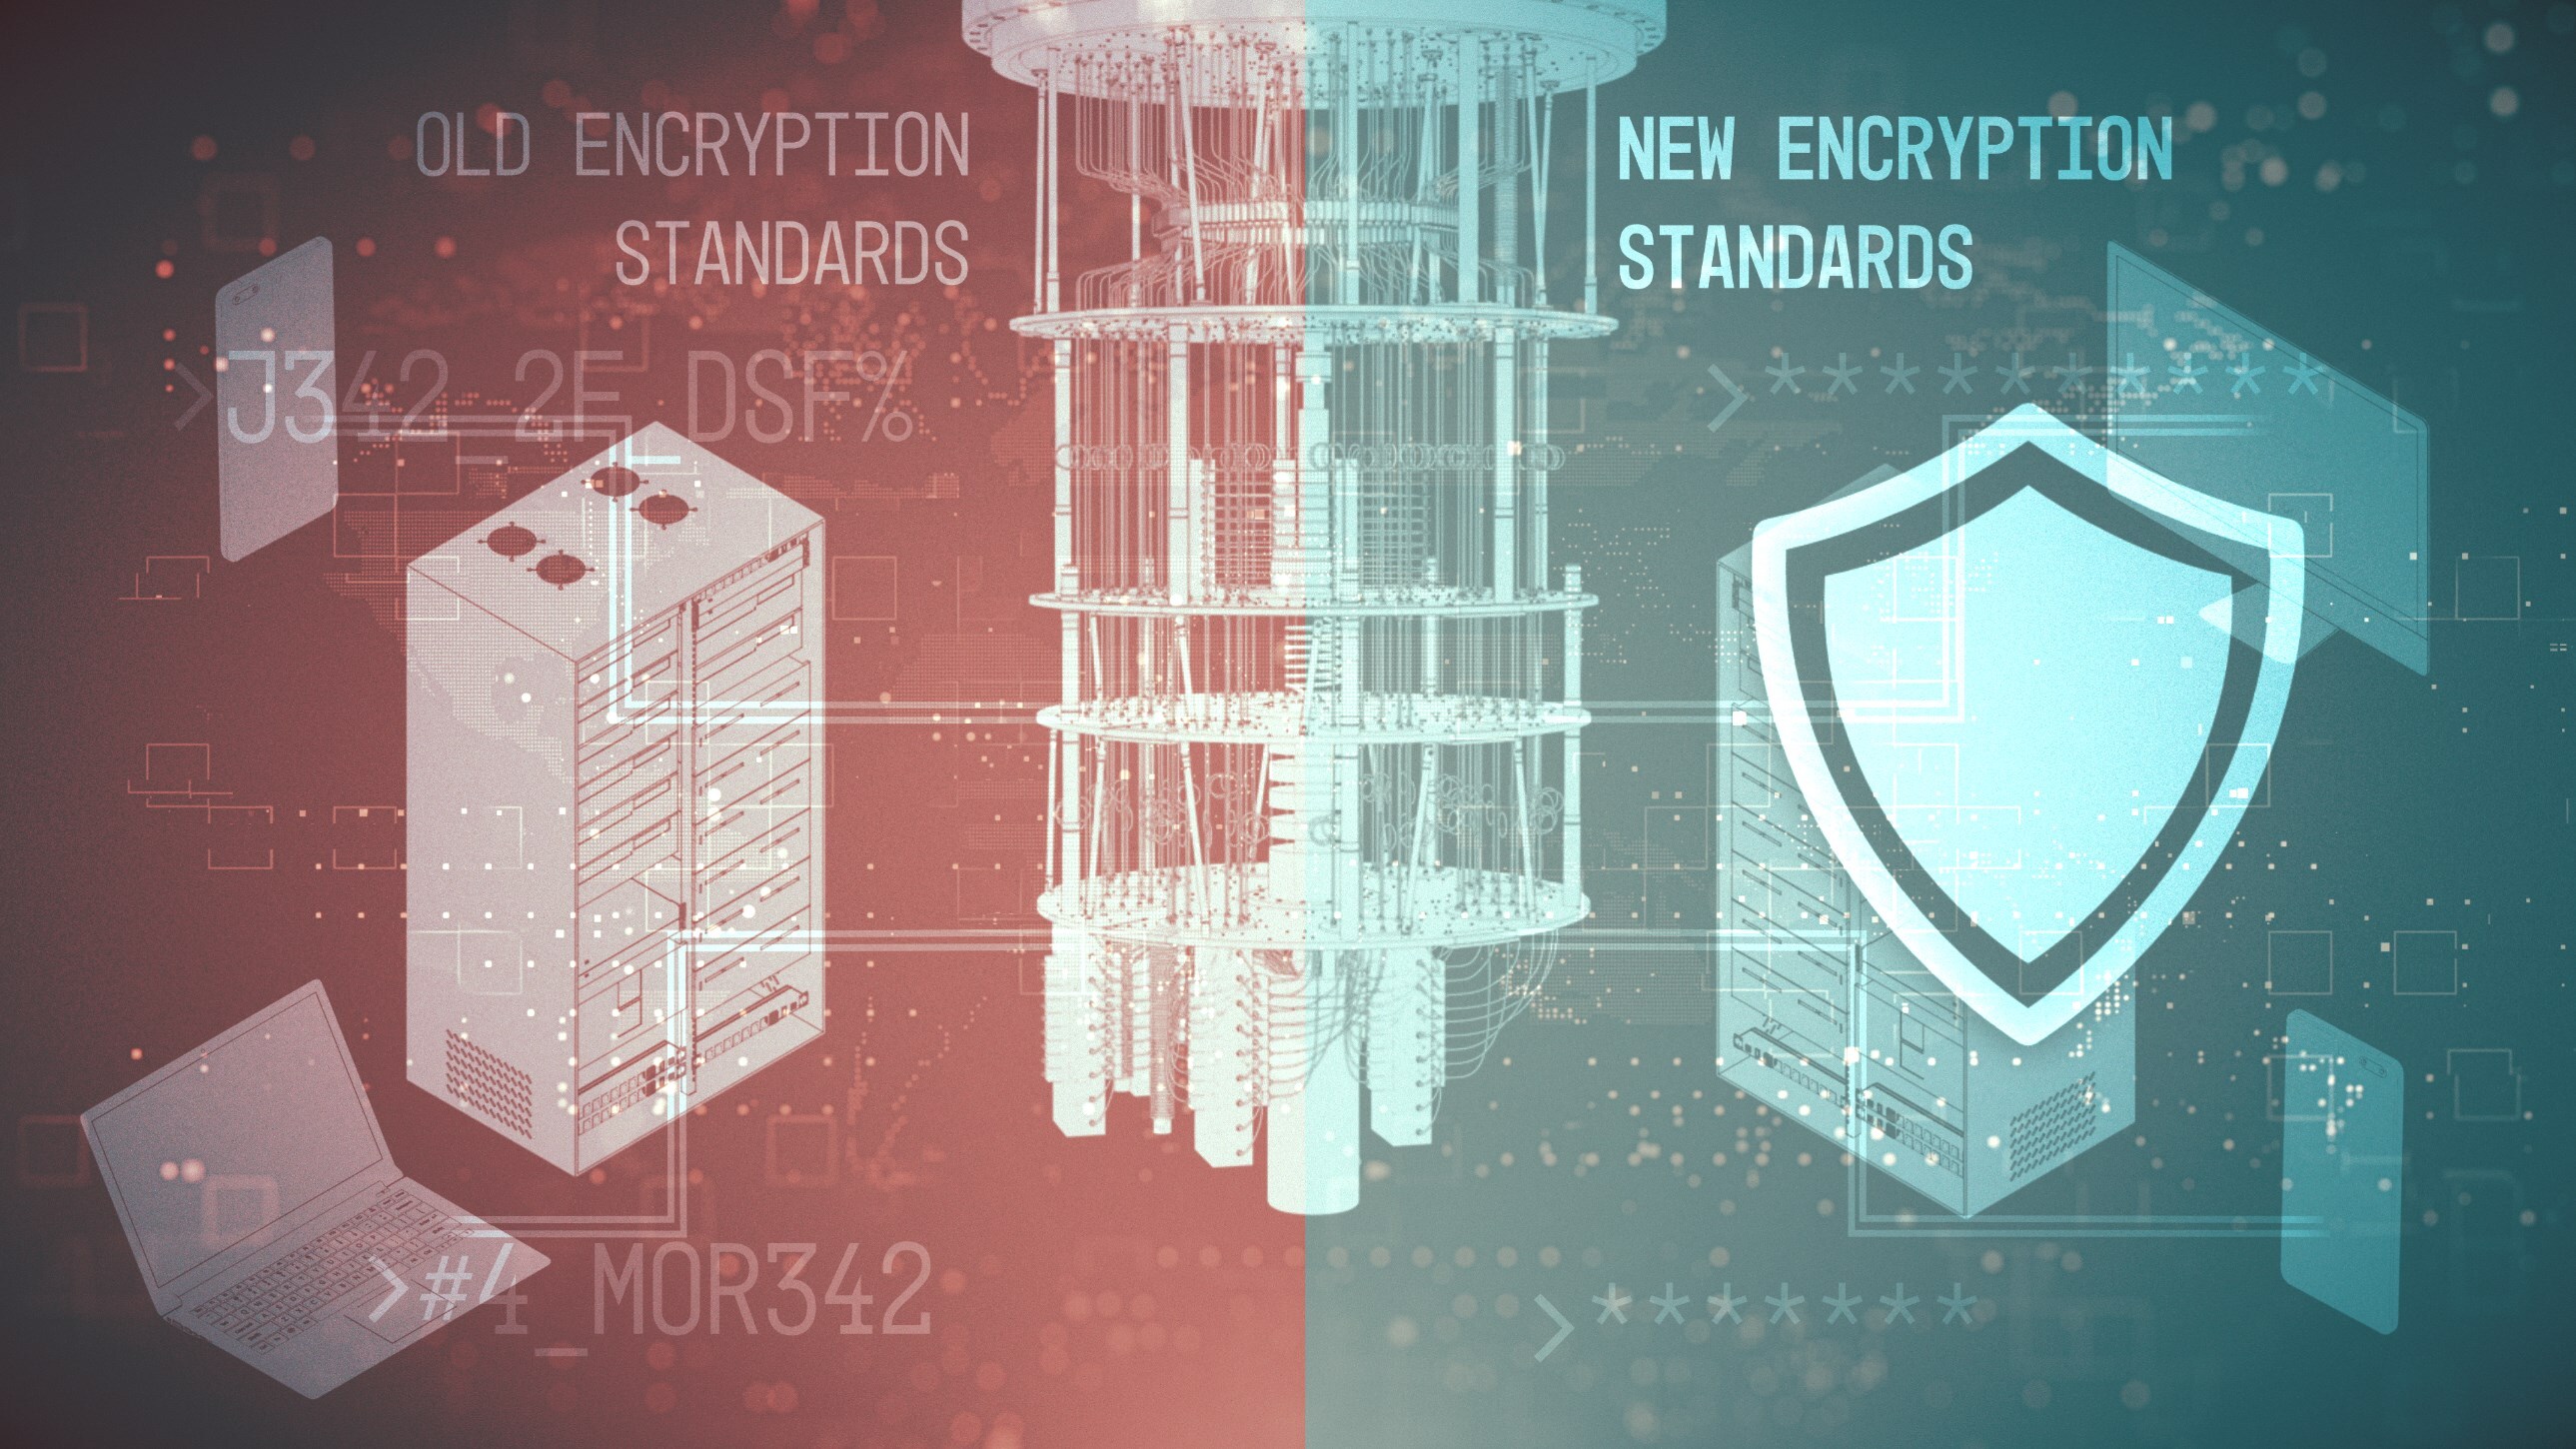 Collage illustration of servers, laptops and phones is divided into left "Old Encryption Standards" and right "New Encryption Standards."